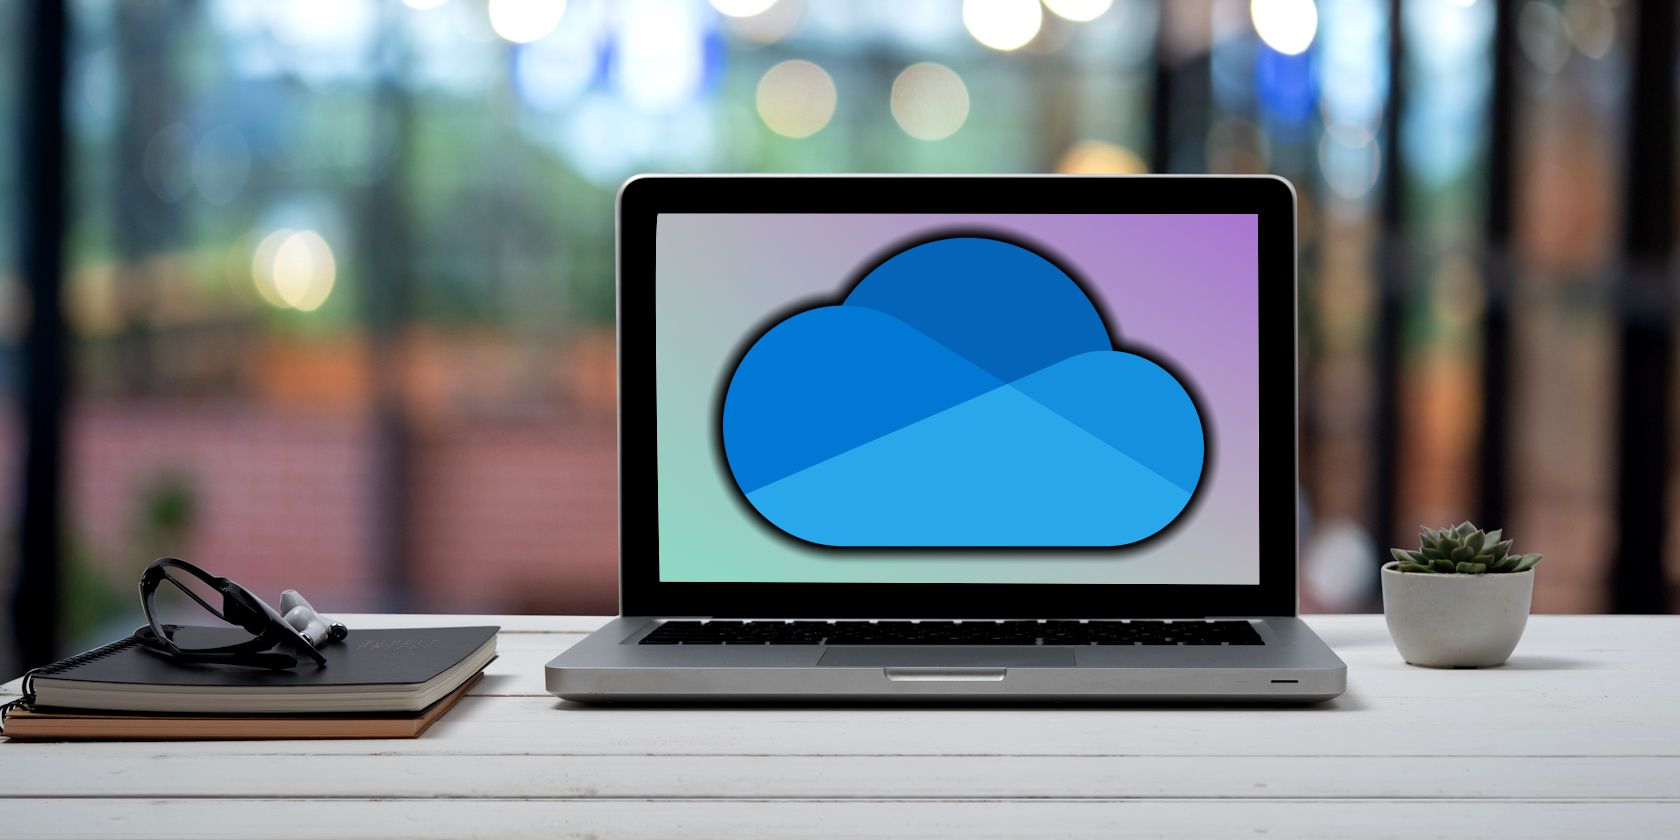 How to Use OneDrive to Access Your Files on Any Device